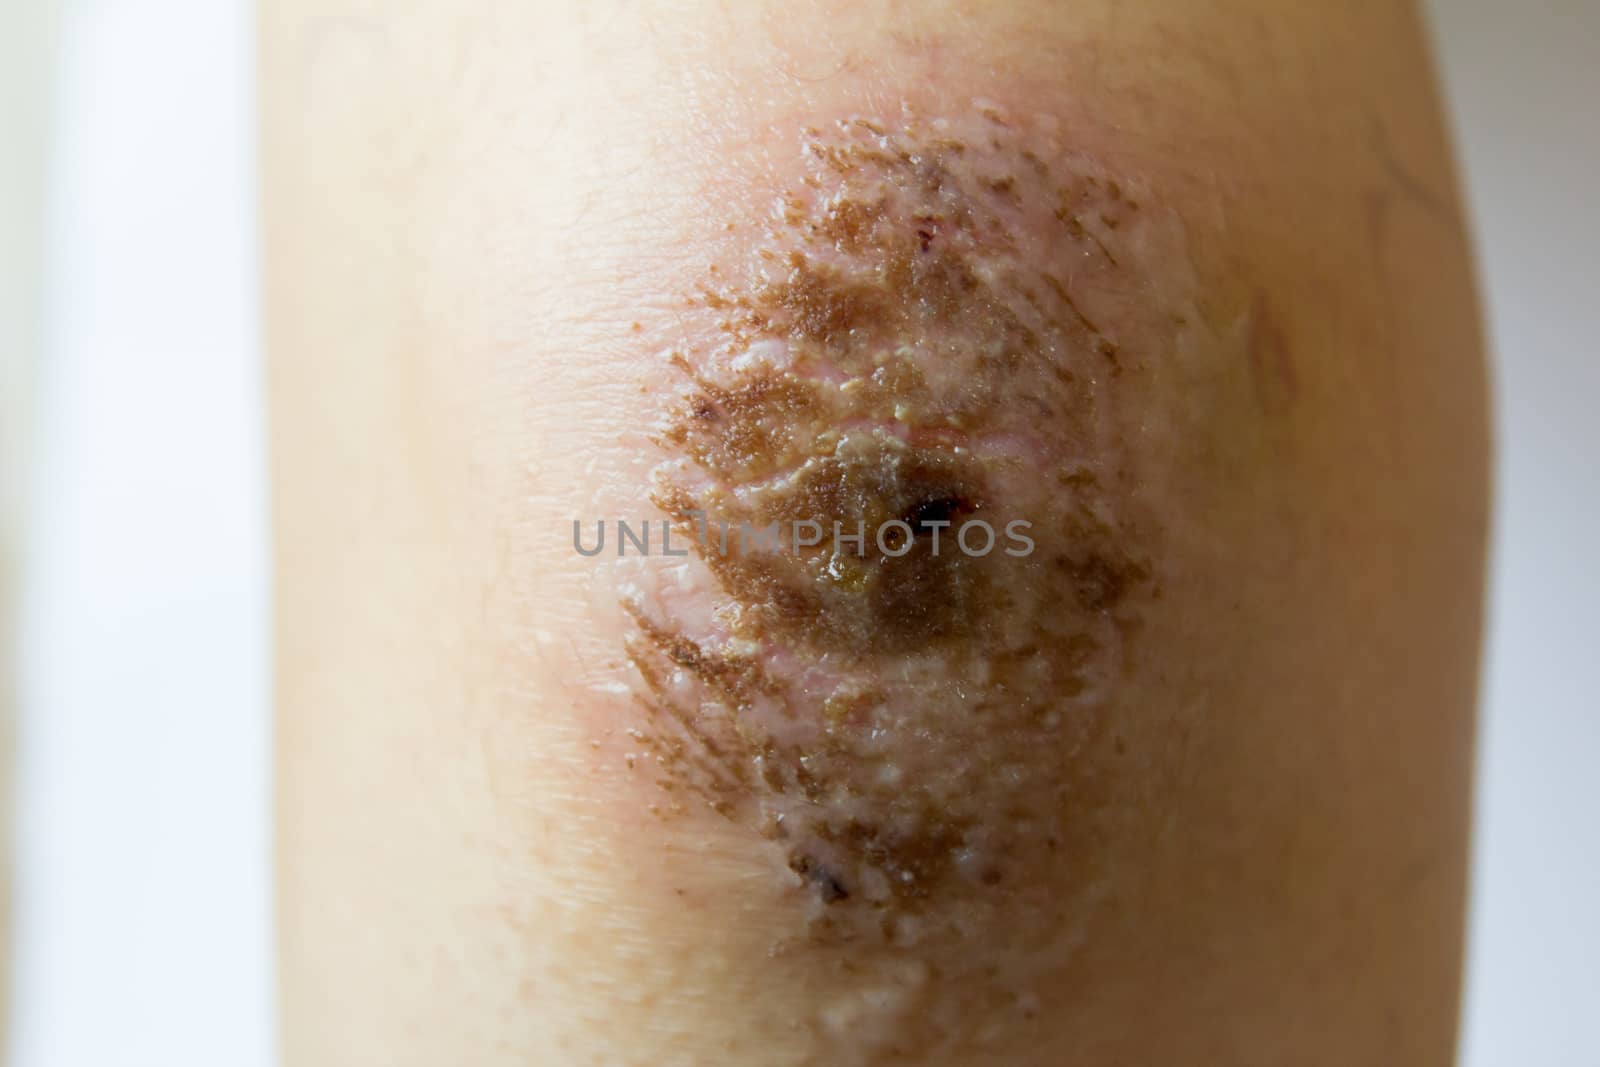 Closed up of red scab injury on woman knee background by Hengpattanapong